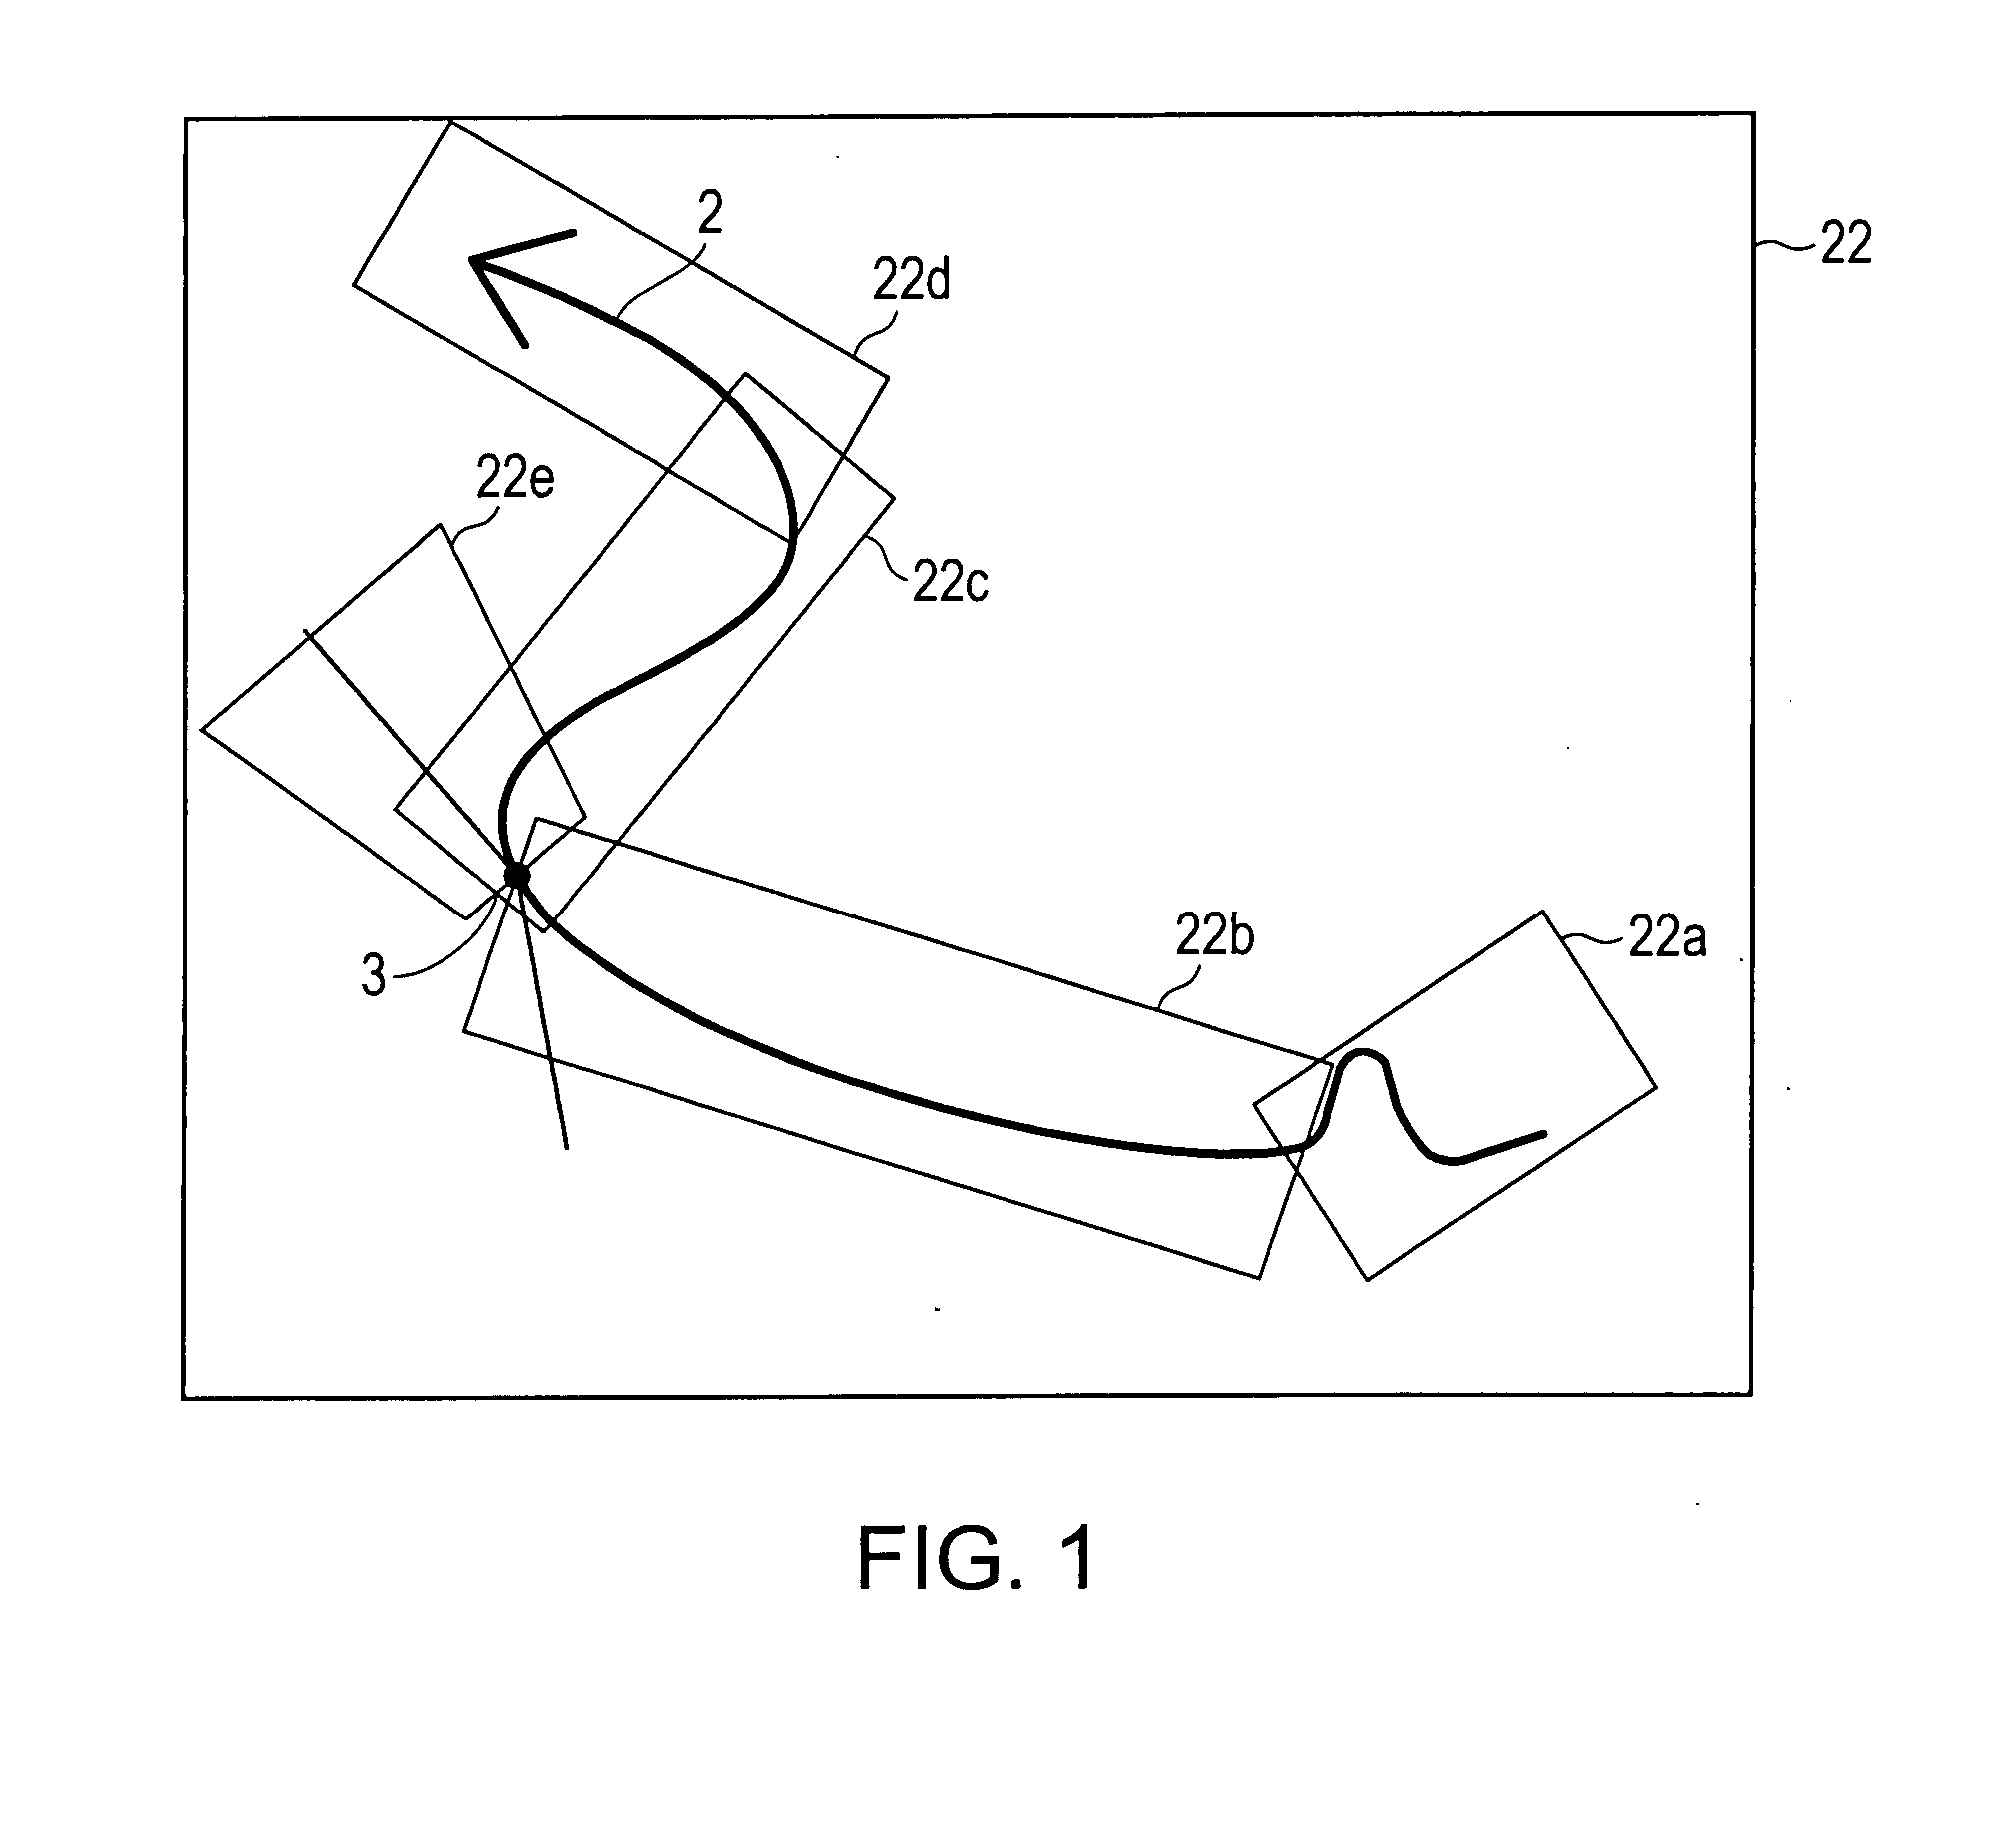 Navigation apparatuses, methods, and programs